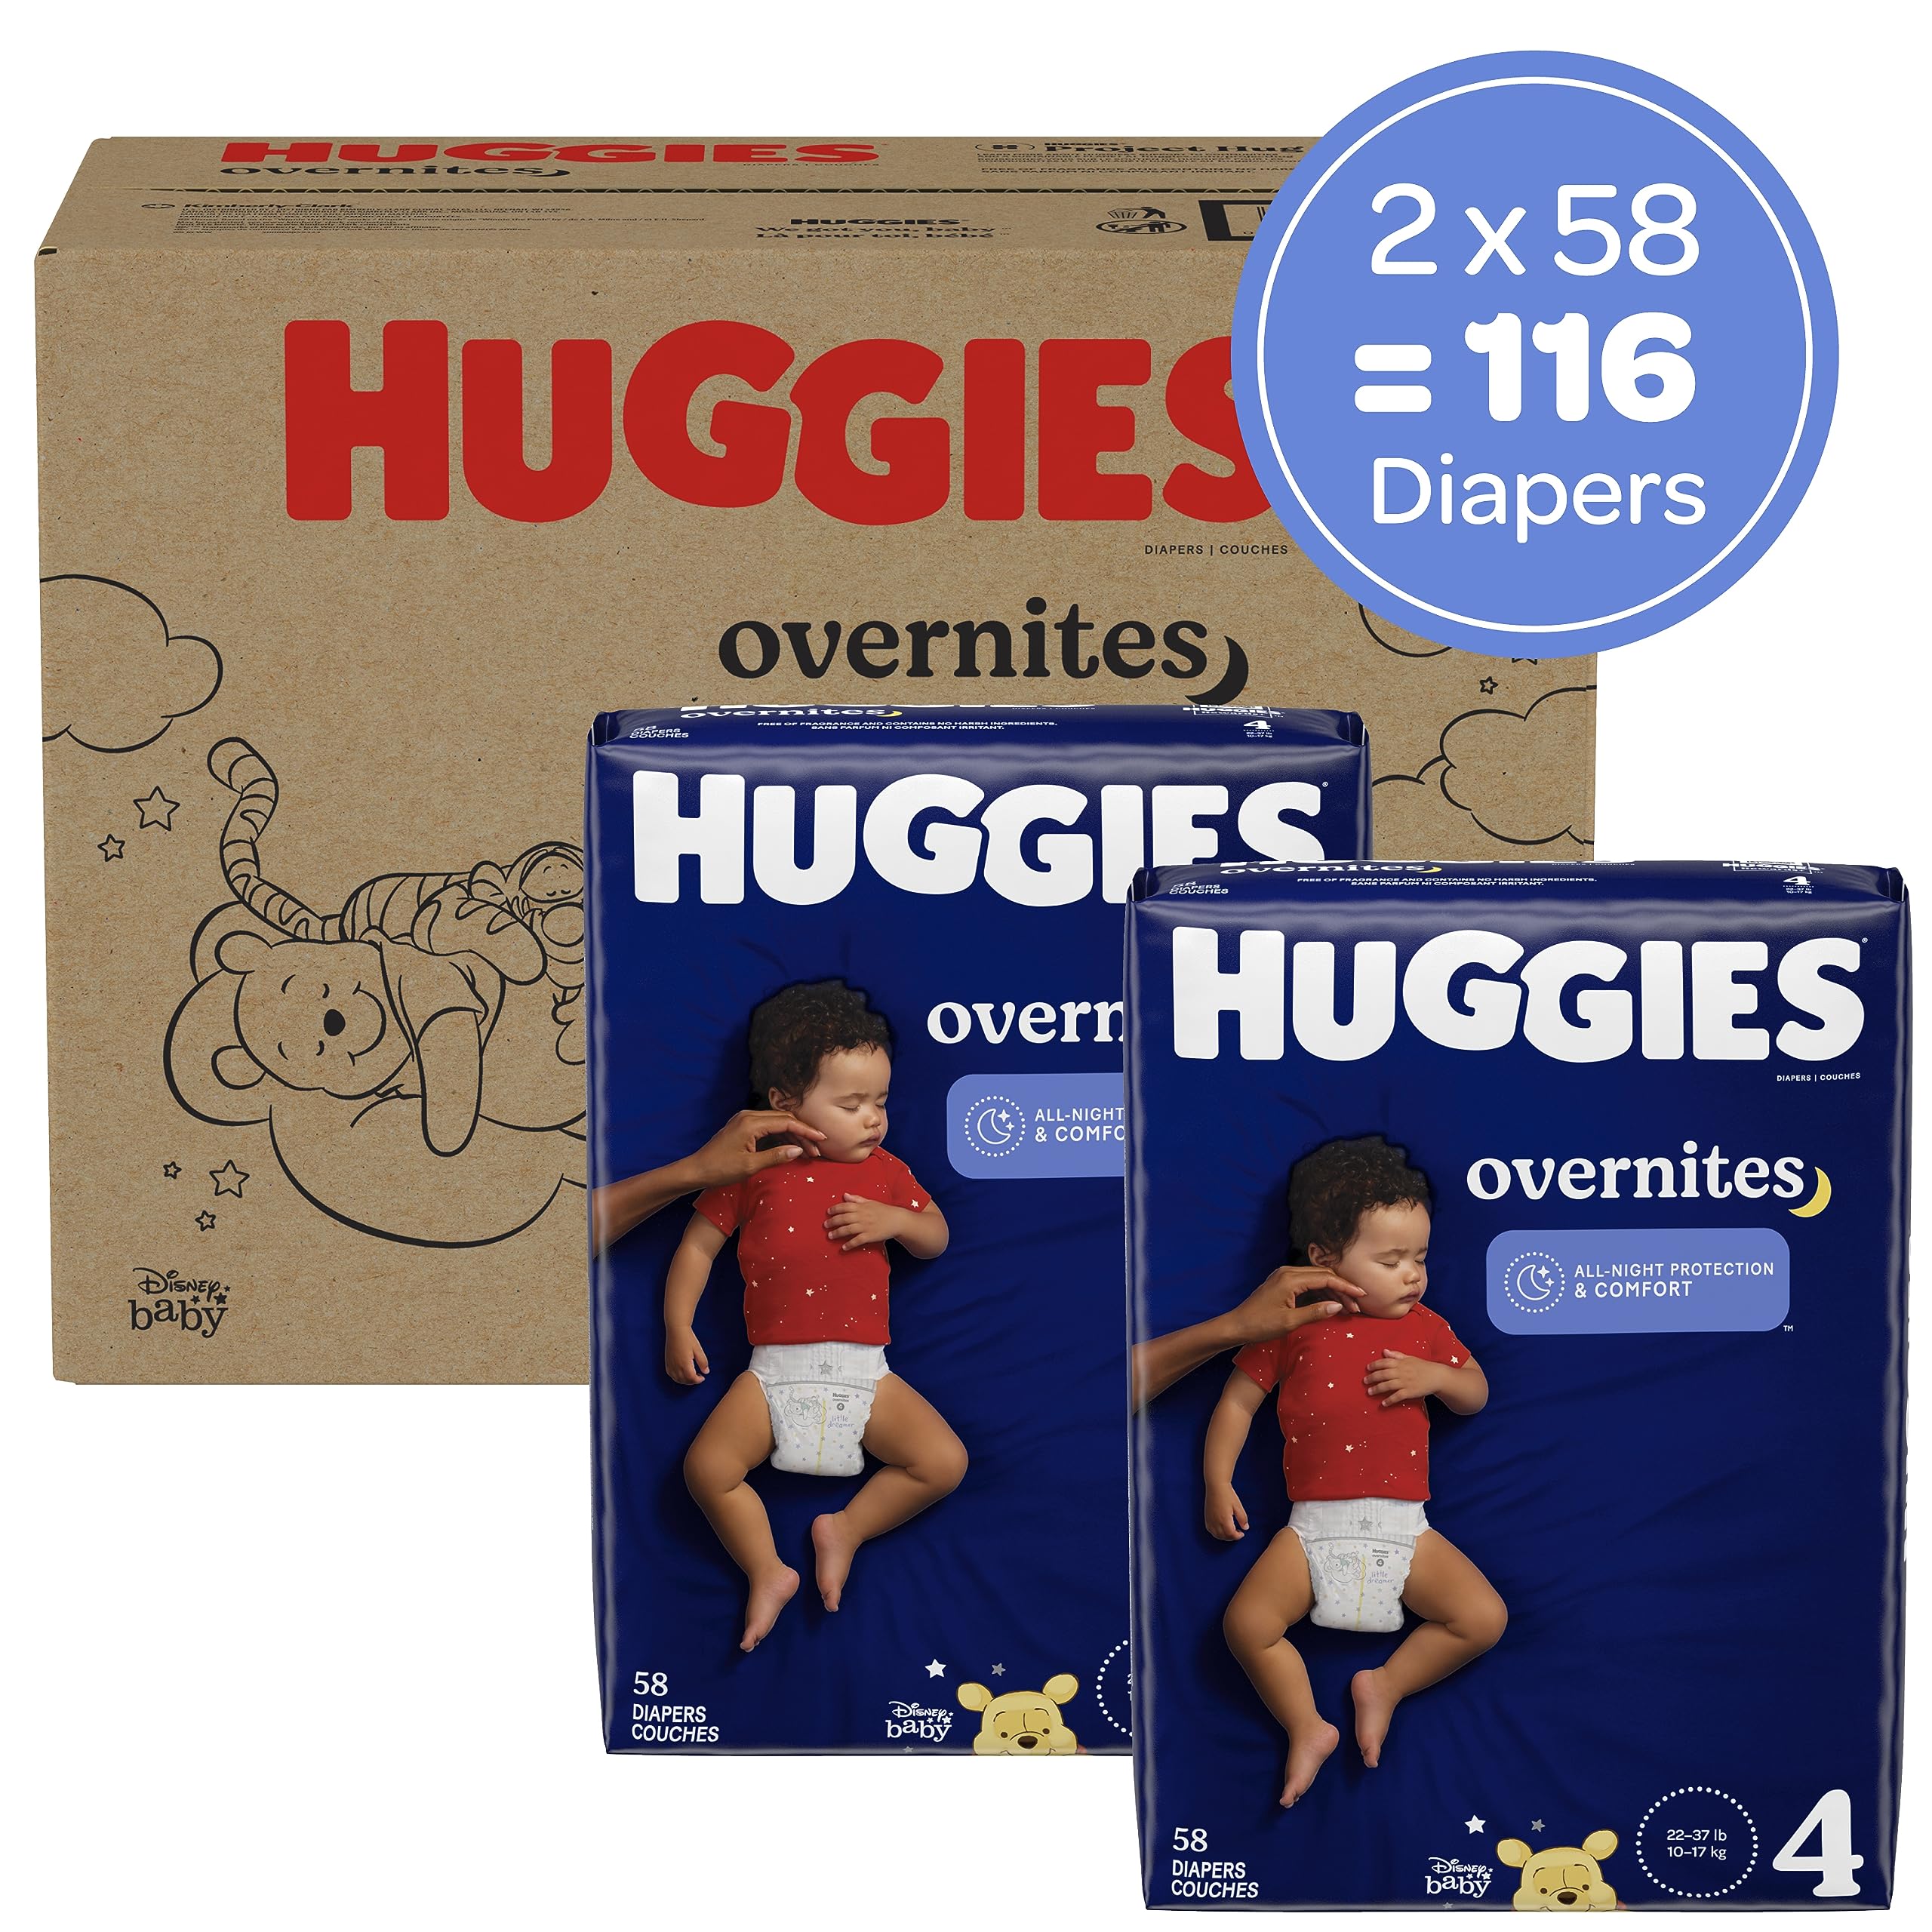 Huggies Overnites Nighttime Baby Diapers, Size 4 (22-37 lbs), 116 Ct